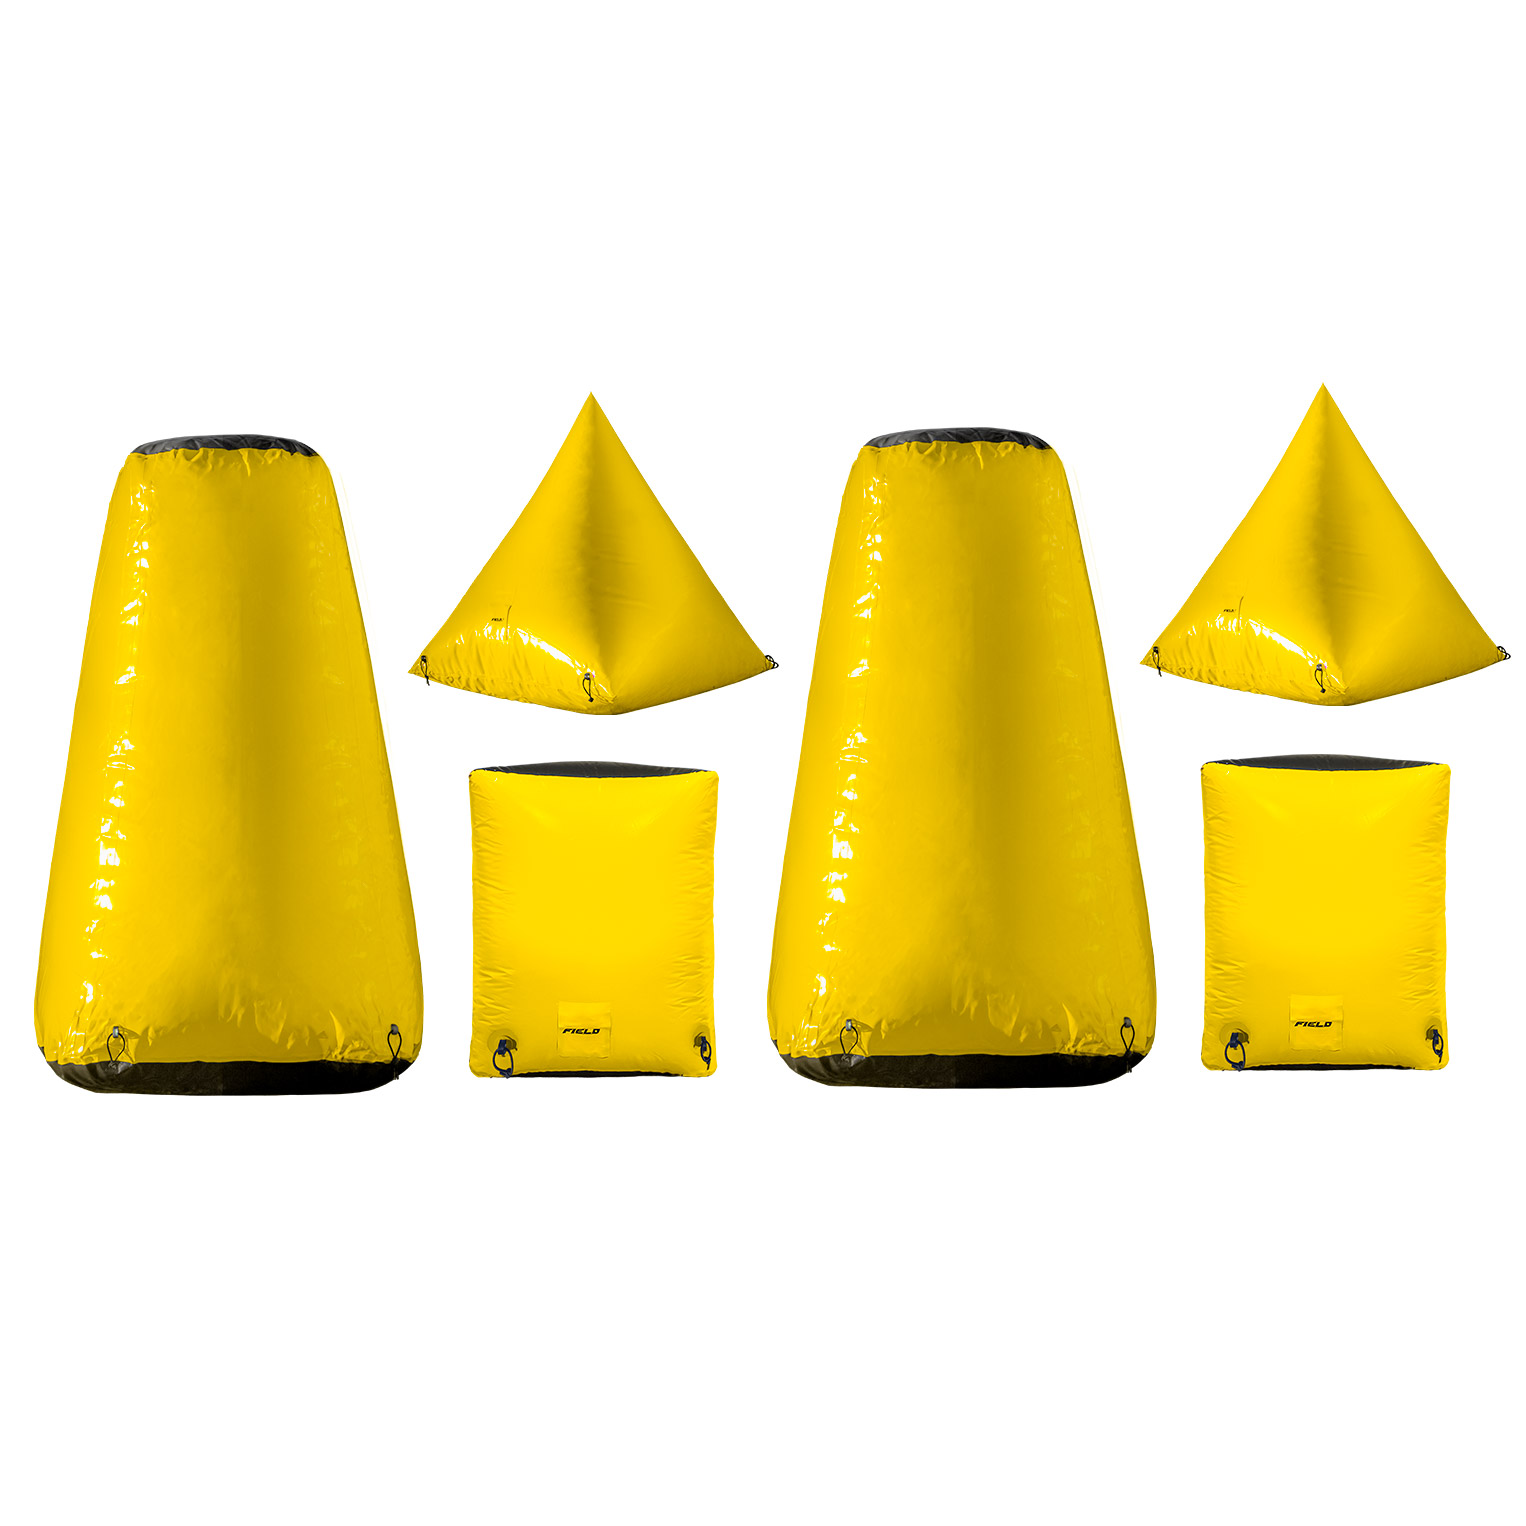 Paintball Bunkers Set of 6 Un